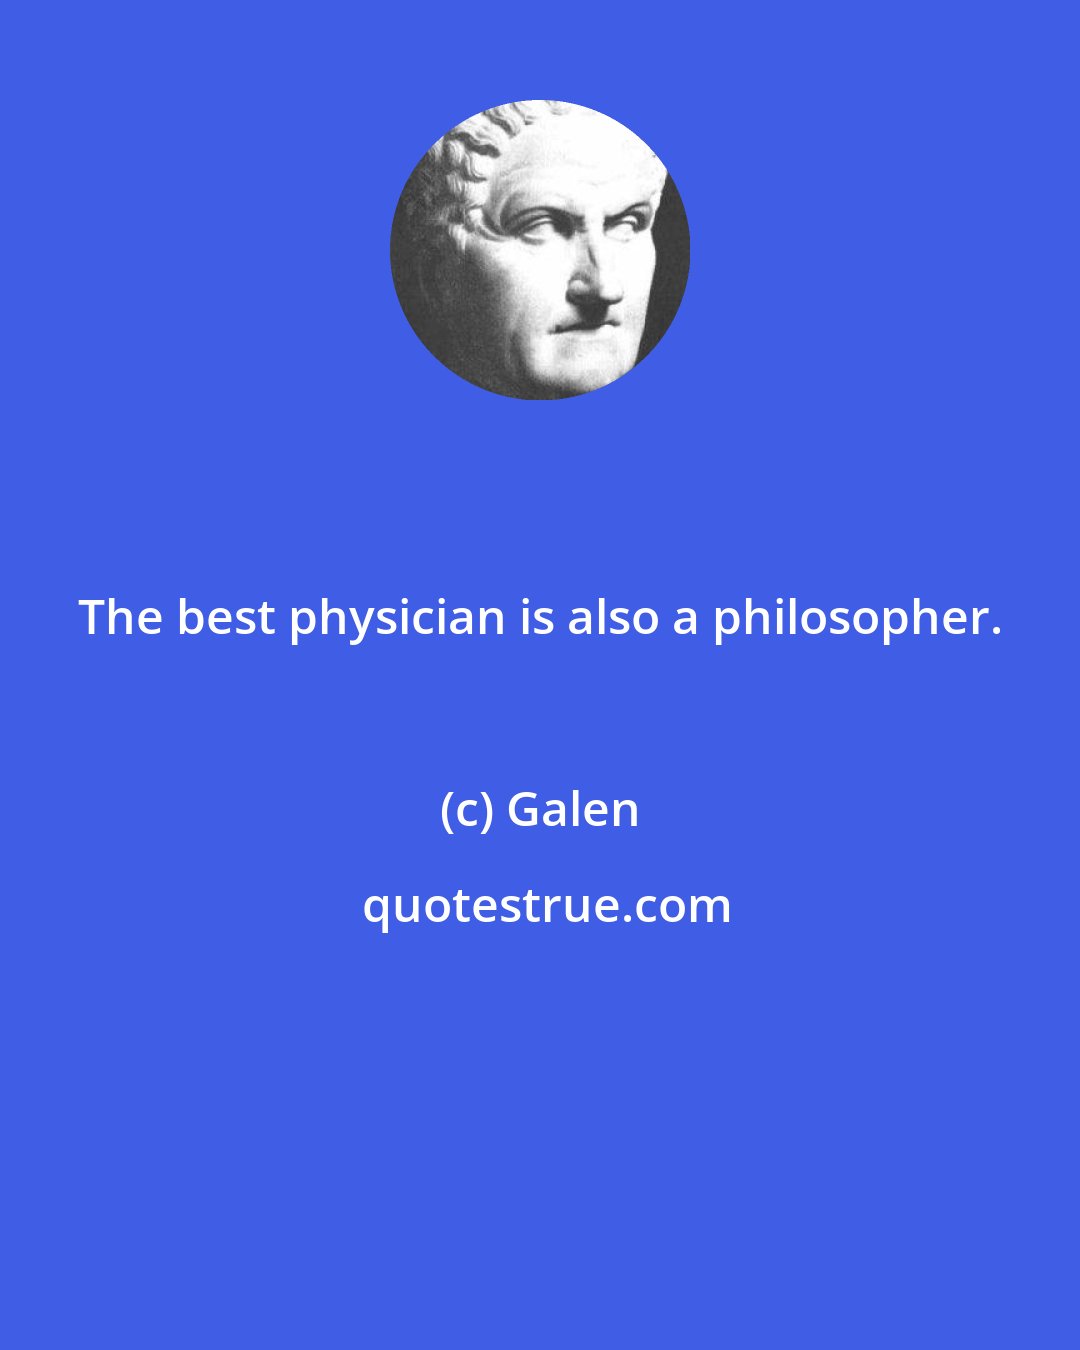 Galen: The best physician is also a philosopher.